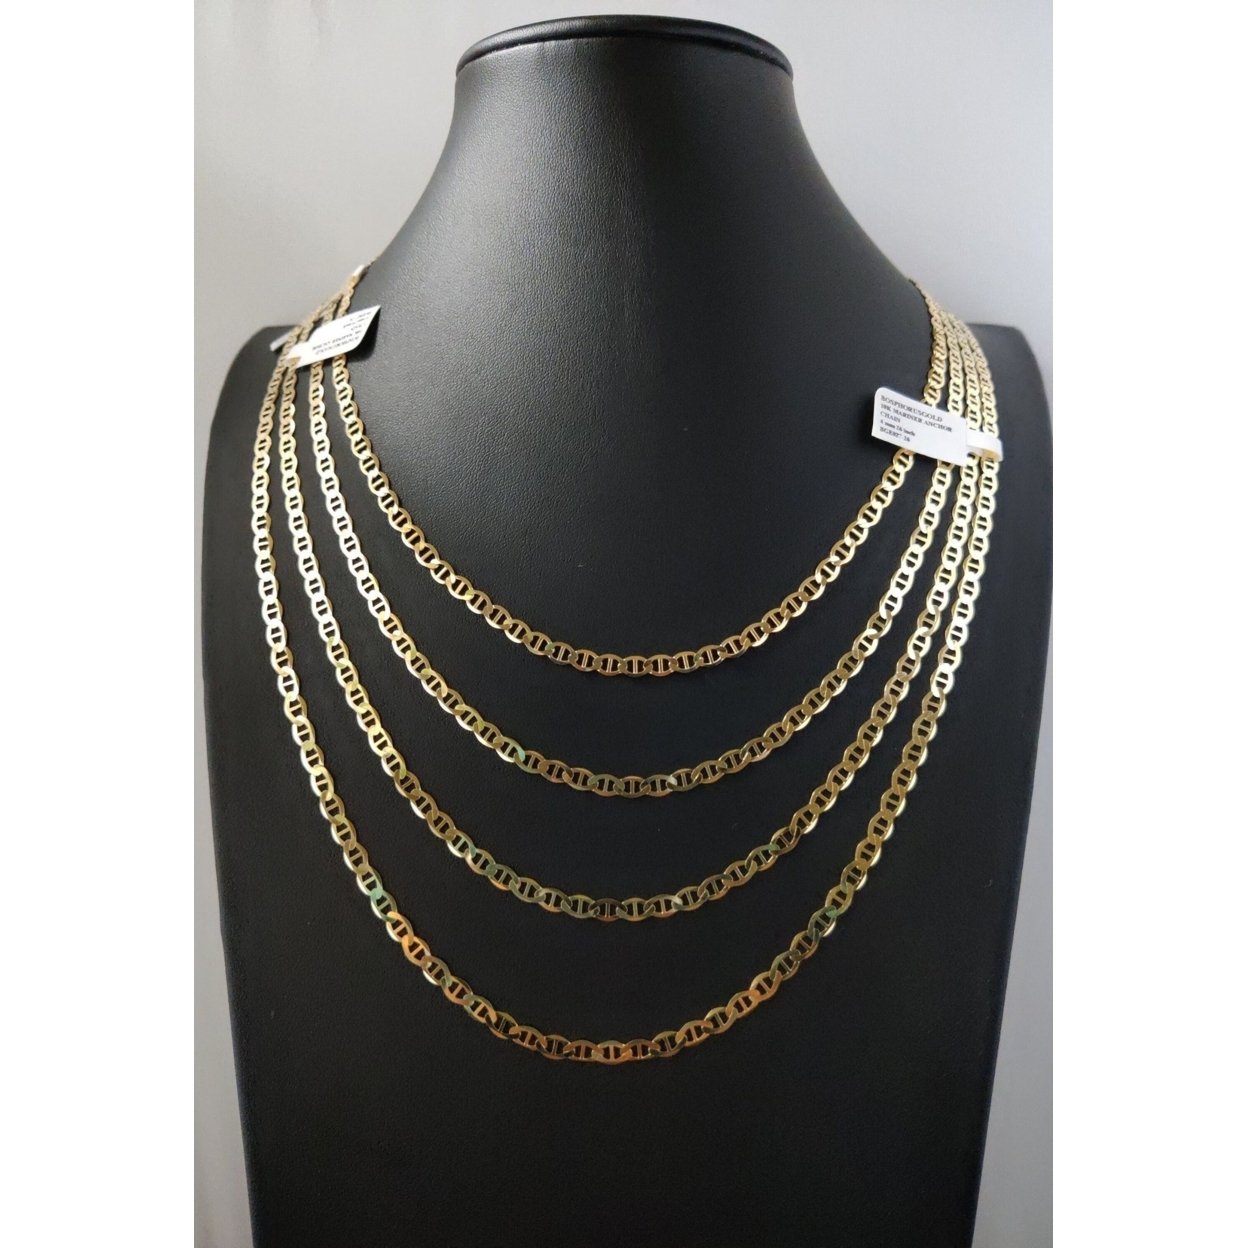 Yellow Gold Filled High Polish Finsh Chain Necklace,Mariner Chain Necklace,Necklace,Gold Necklace, Mariner Necklace, - 22''